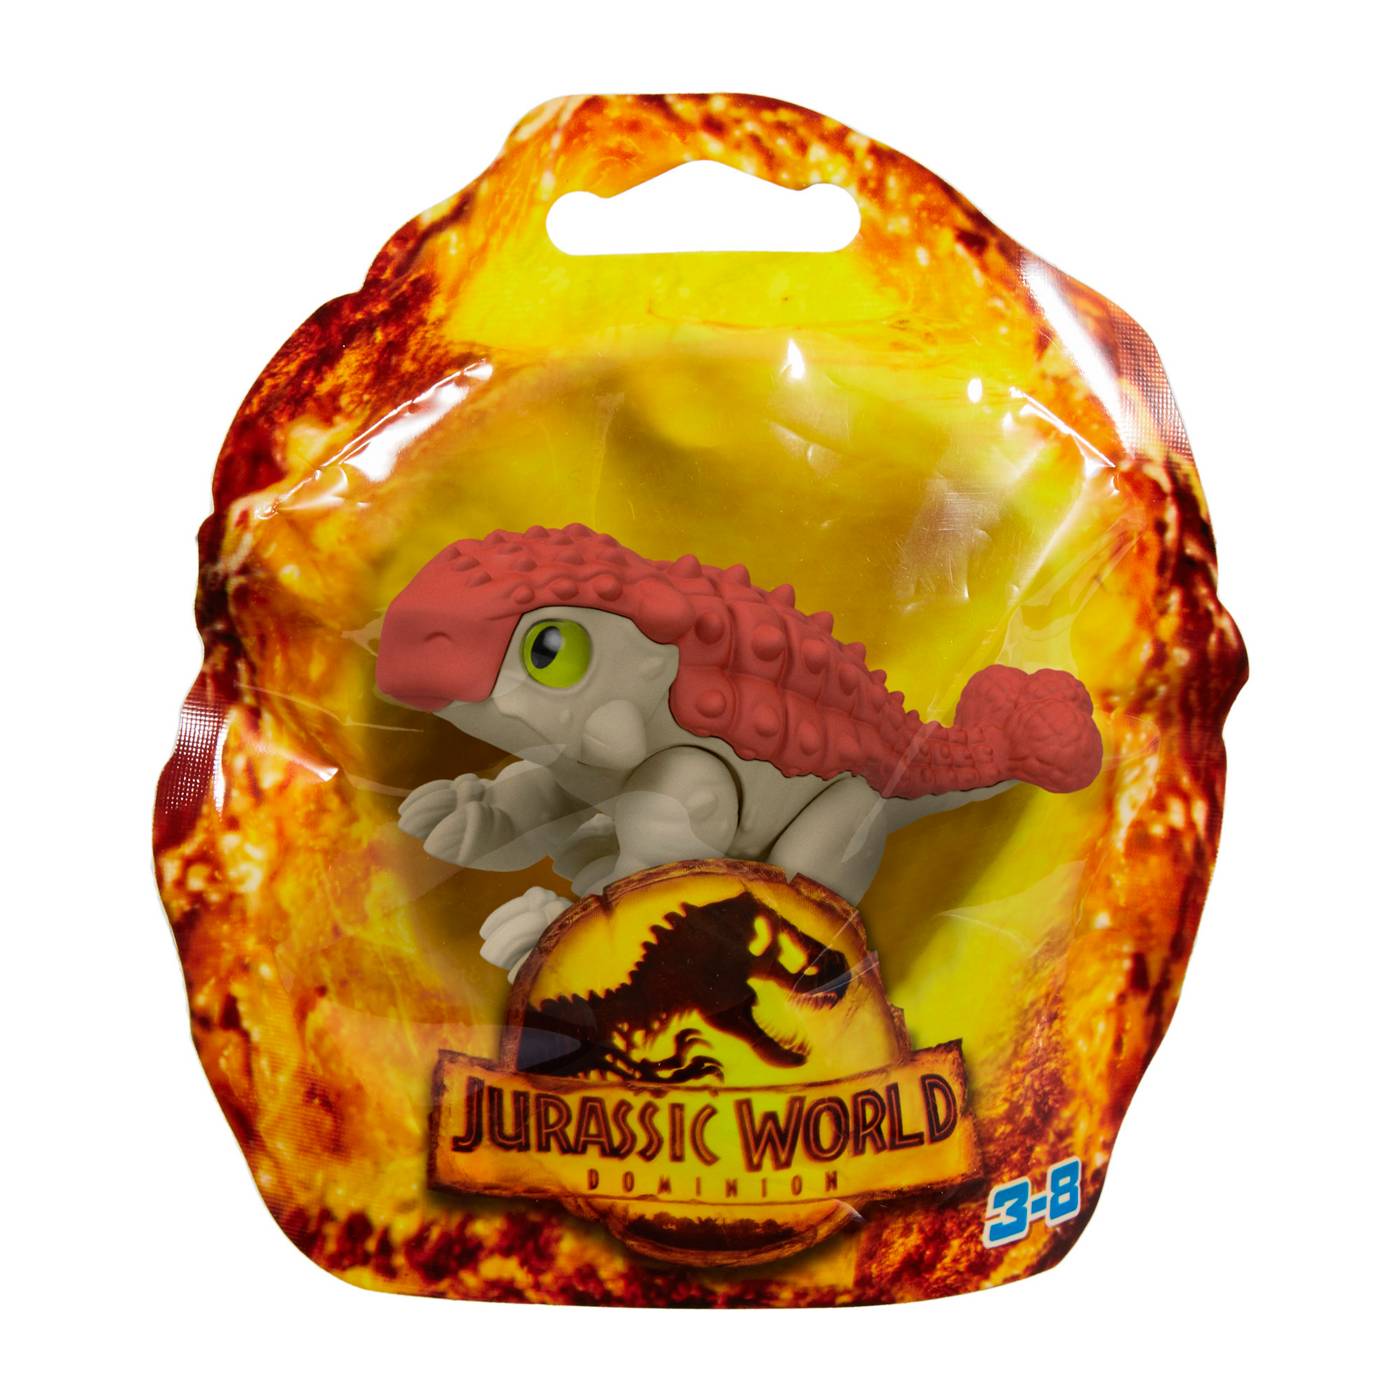 Imaginext Jurassic World Dominion Baby Dino - Assorted; image 2 of 2